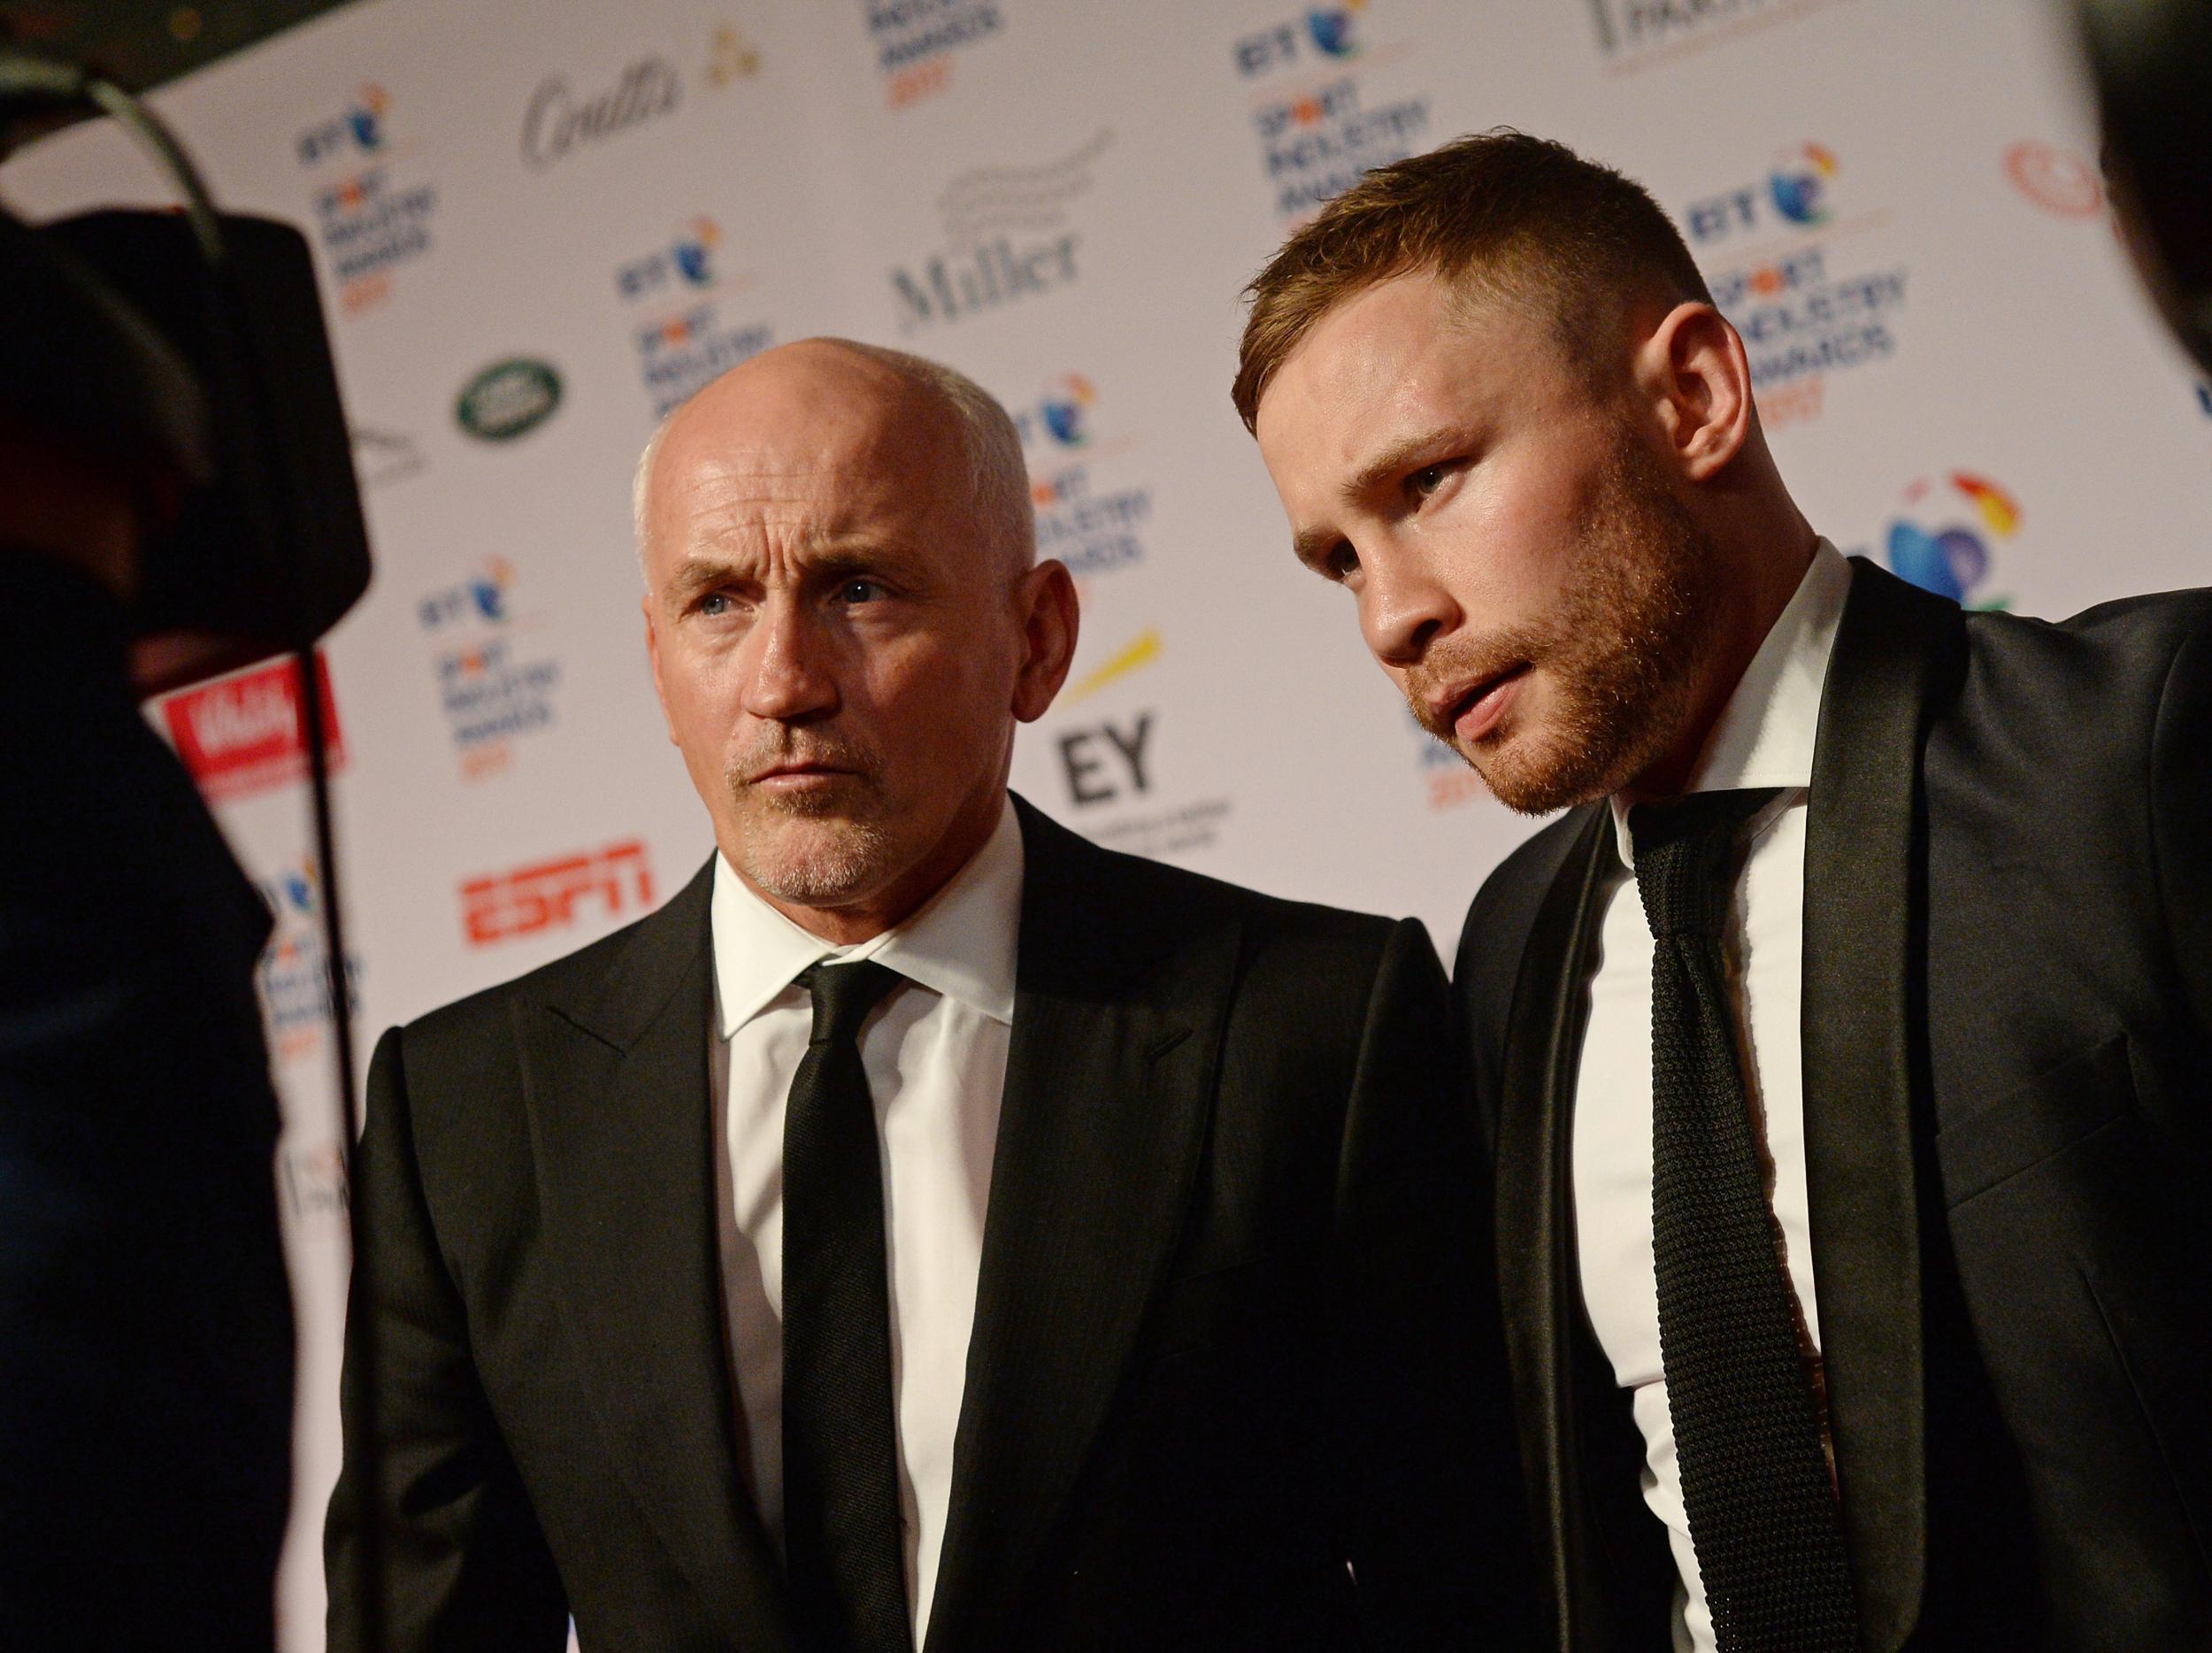 McGuigan on Frampton: 'This kid could end up being the best Irish fighter who ever lived'